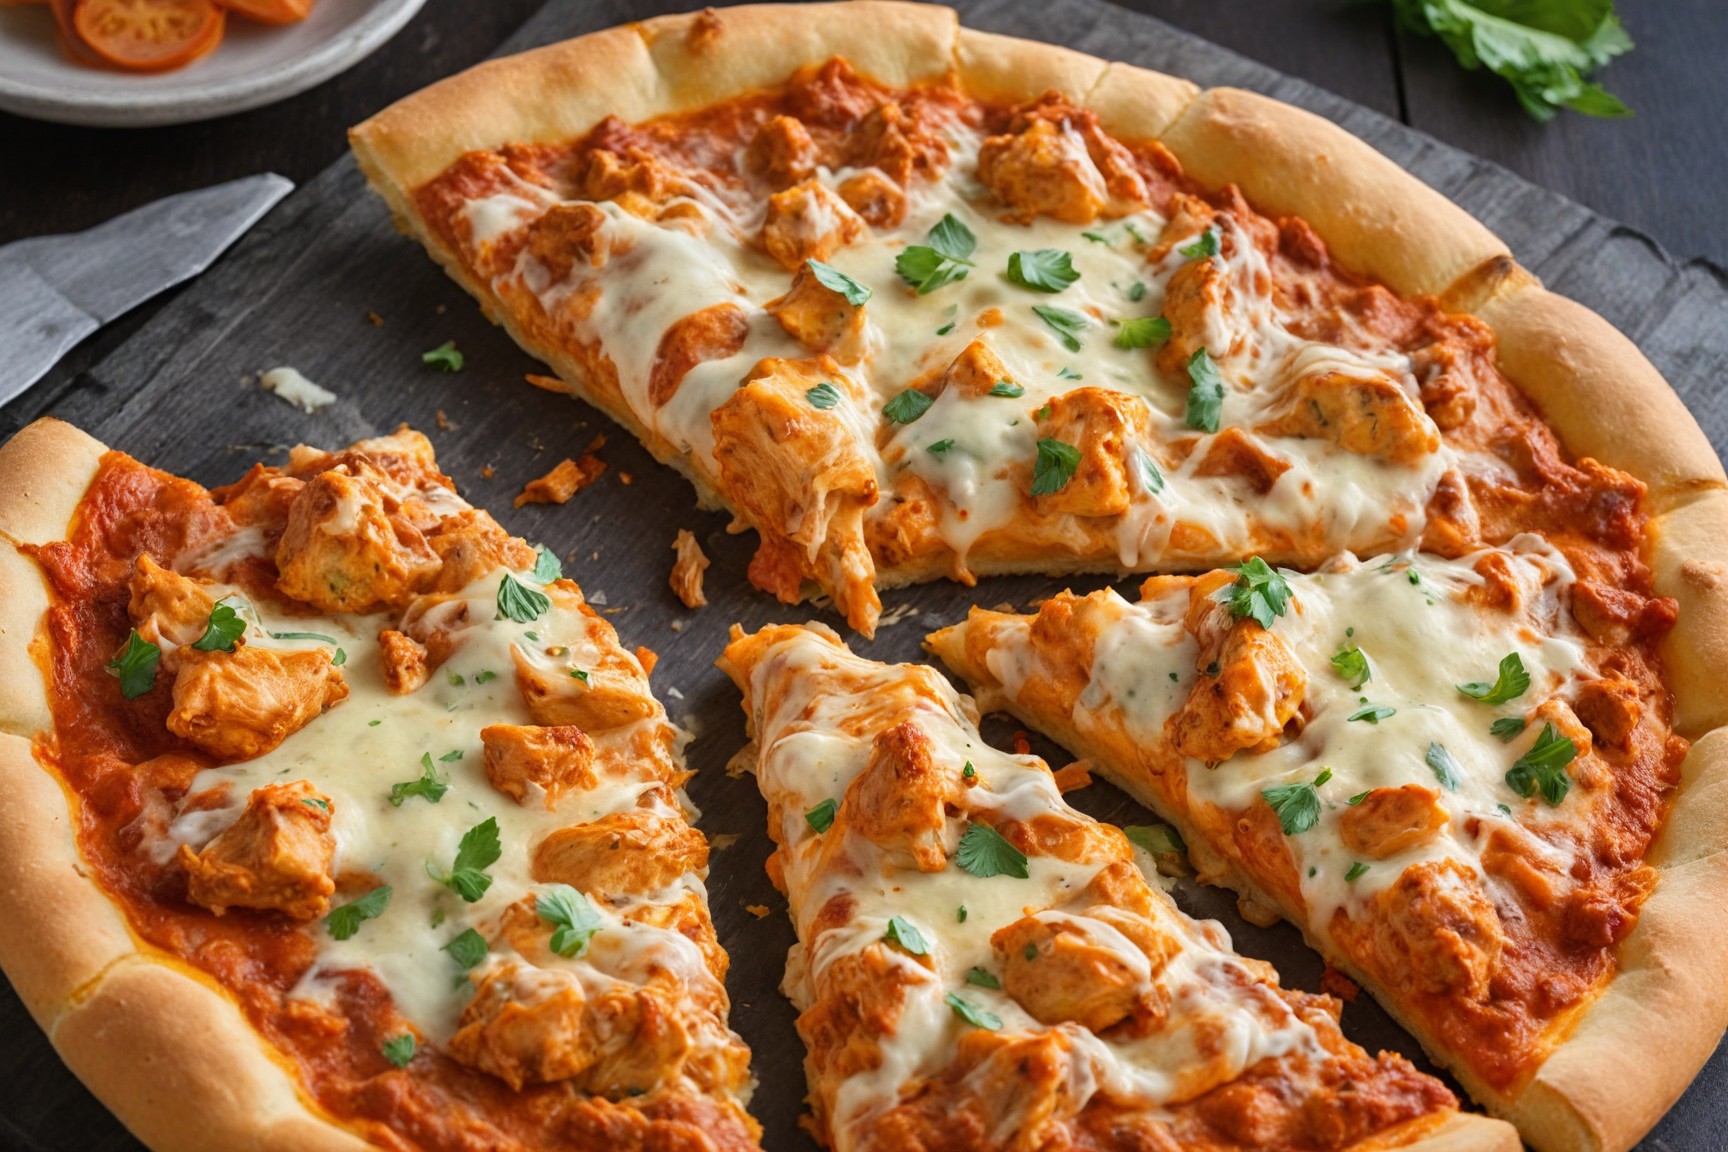 Buffalo Chicken Pizza topped with spicy buffalo sauce, chicken, and melted cheese.